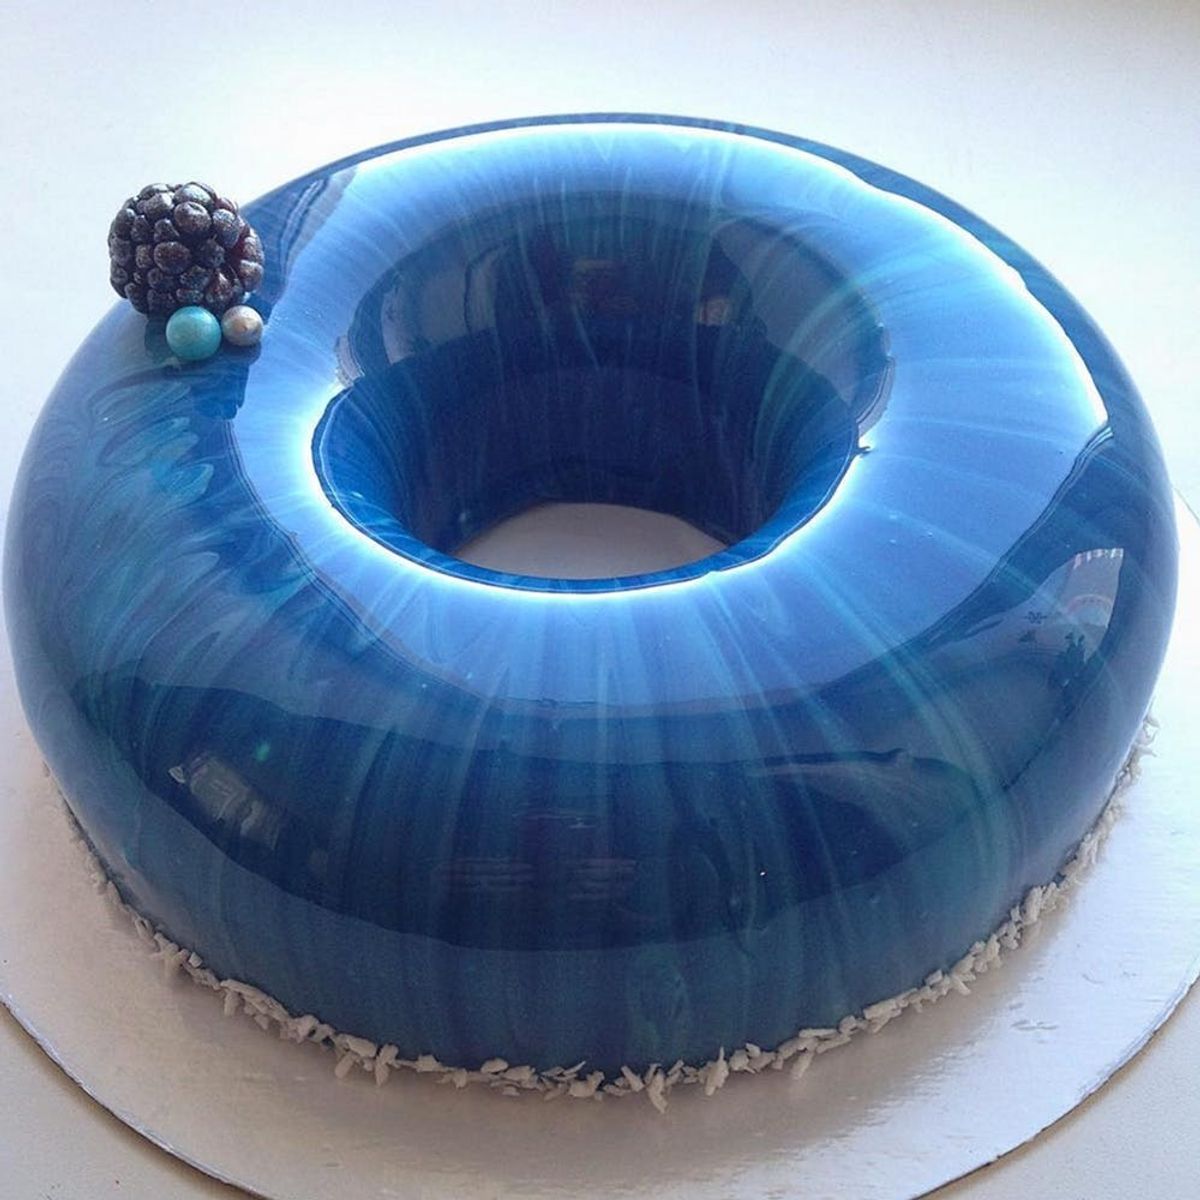 This Woman’s Perfect Cakes Are Blowing the Internet’s Mind